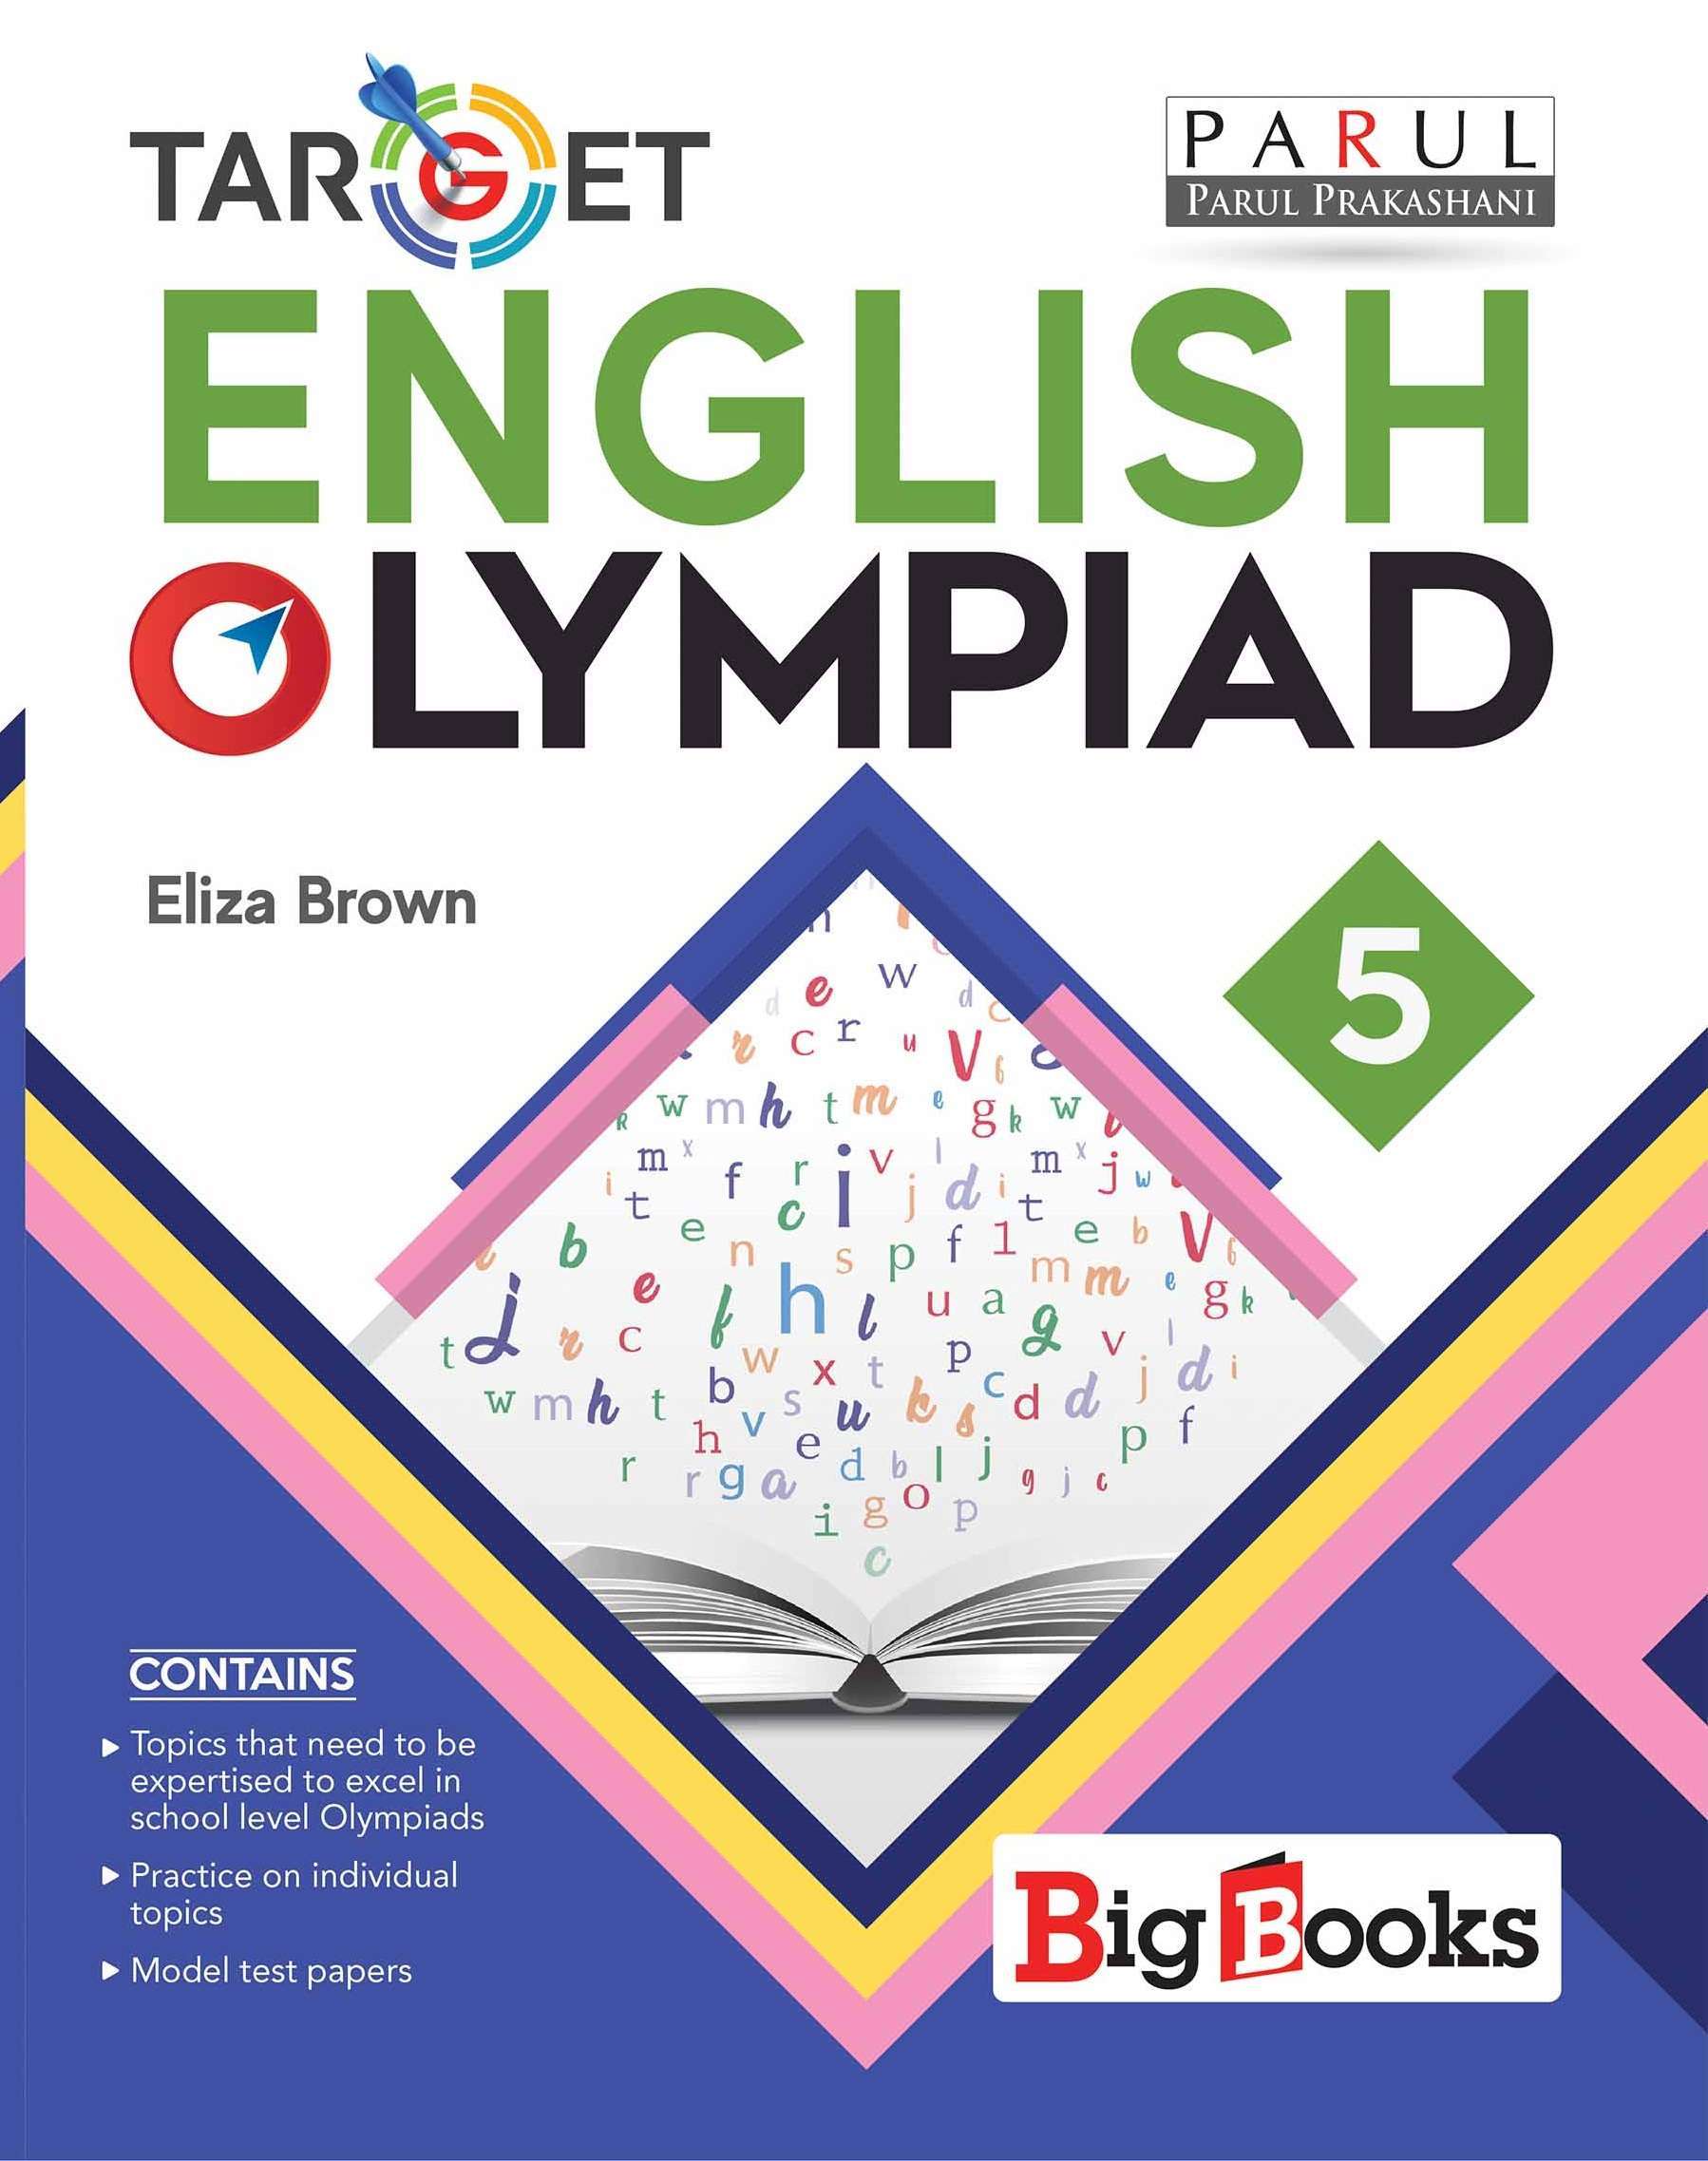 Buy English Olympiad book for 5